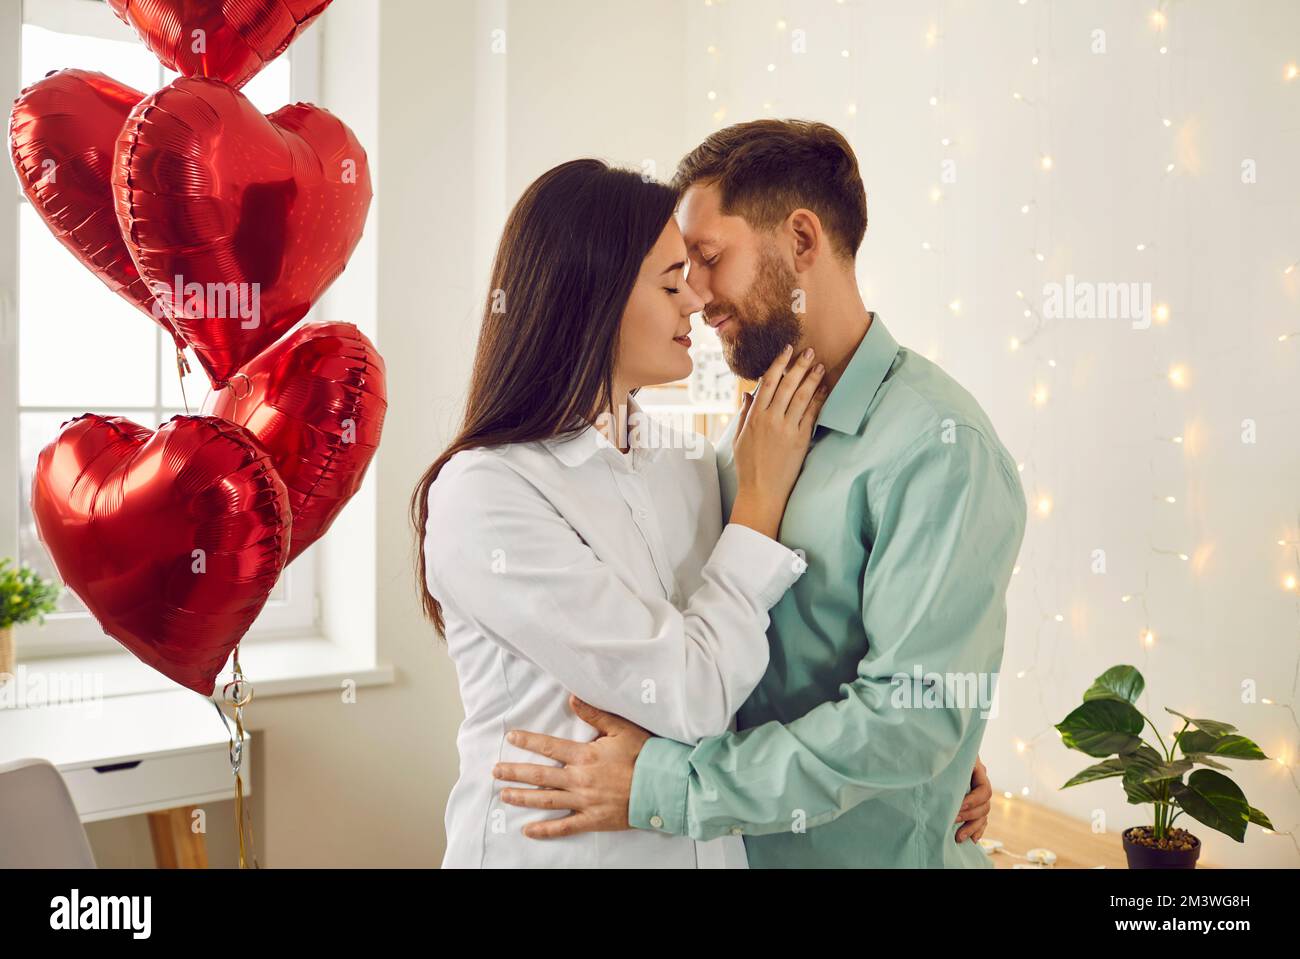 649 Couple Kissing Balloon Stock Photos, High-Res Pictures, and Images -  Getty Images